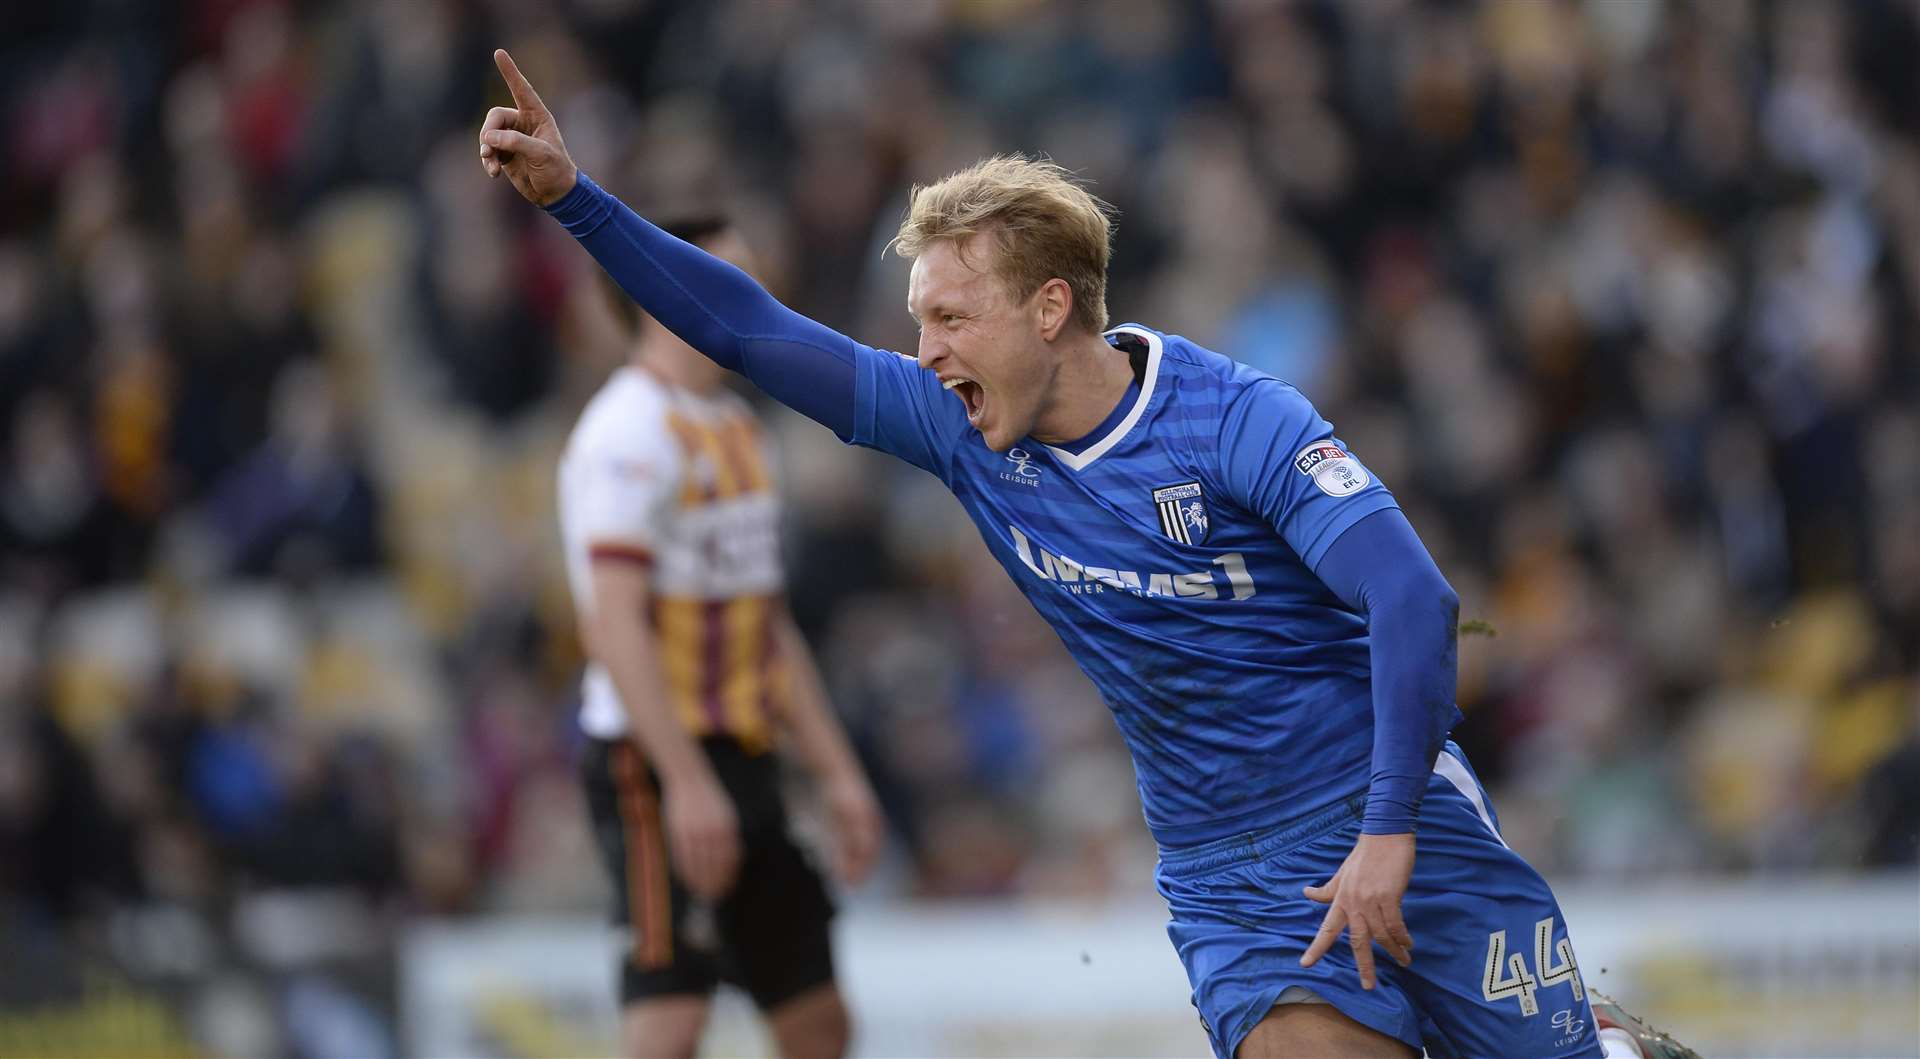 Josh Wright celebrates a goal for Gills against Bradford City at Valley Parade. He's one of their new signings this season and will captain the Bantams.